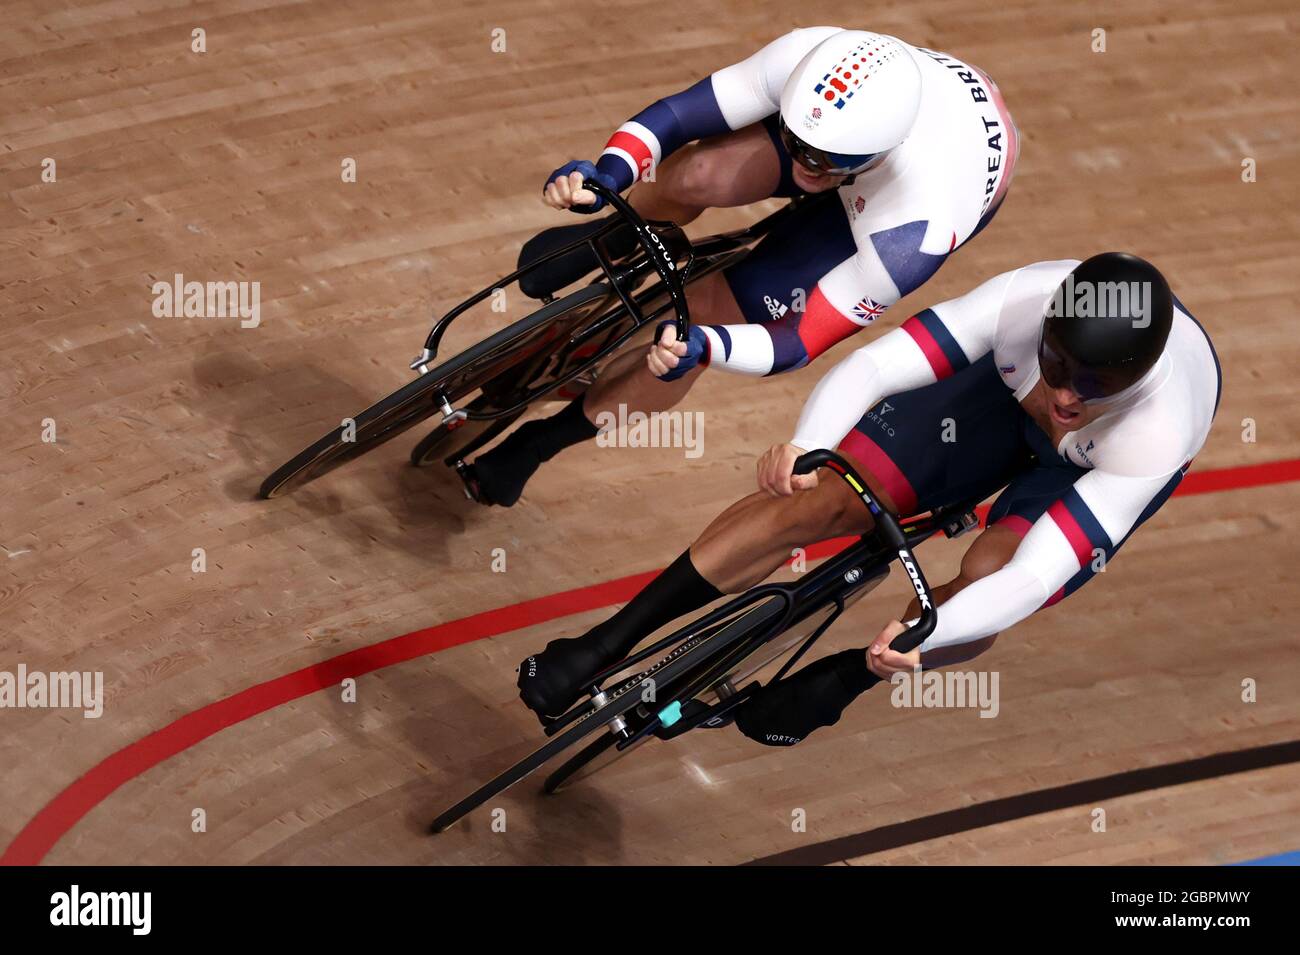 2020 cycling schedule track tokyo indoor cycling